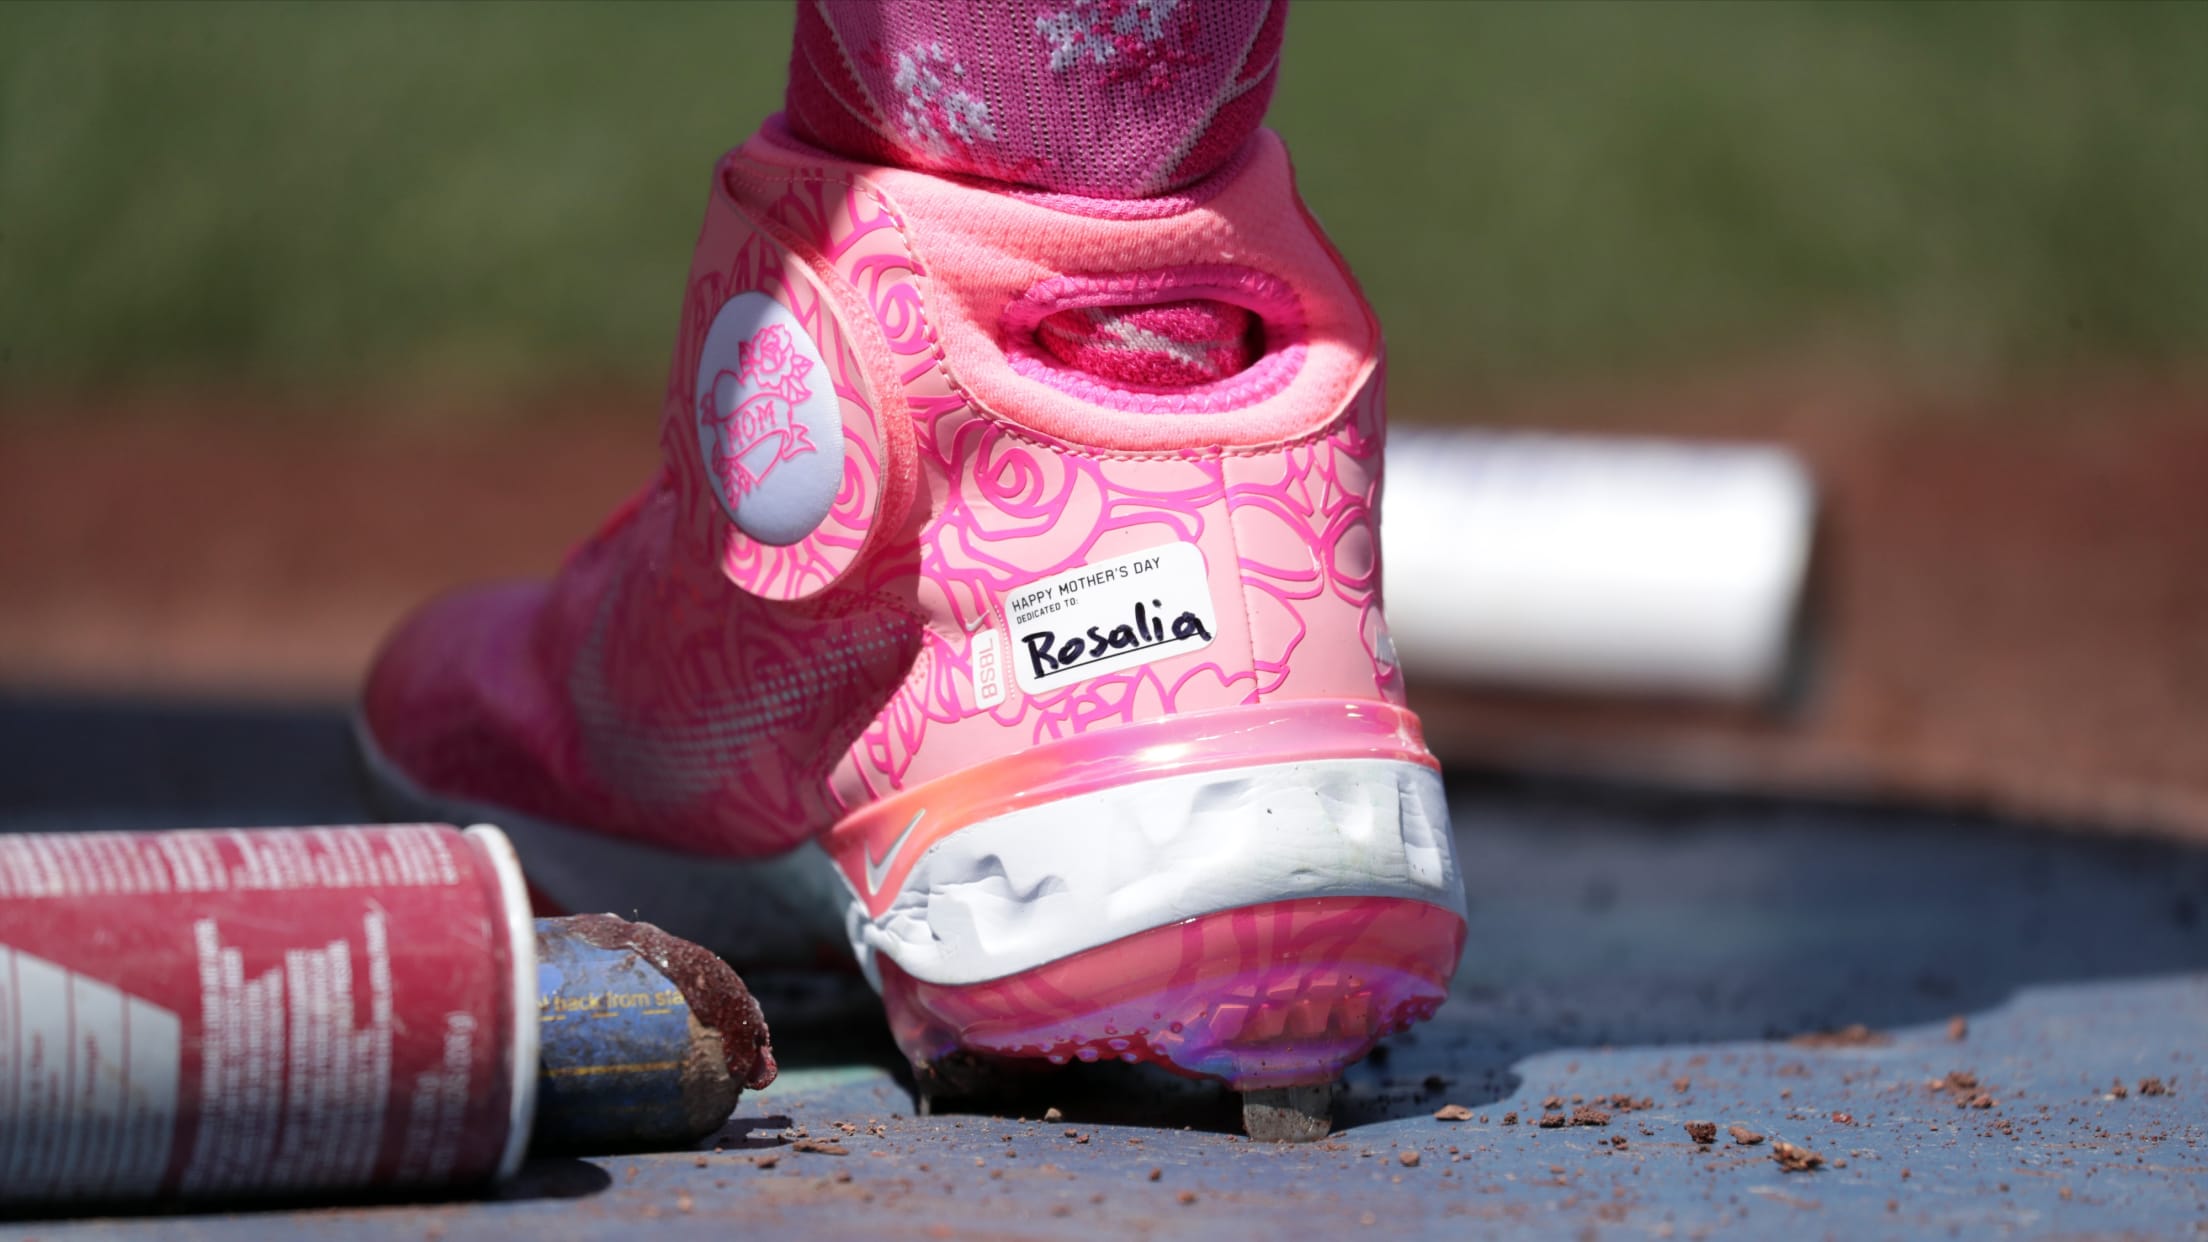 Happy Mother's Day: All 30 MLB Teams Wear Pink and Grey in Honour of Moms  Everywhere – SportsLogos.Net News